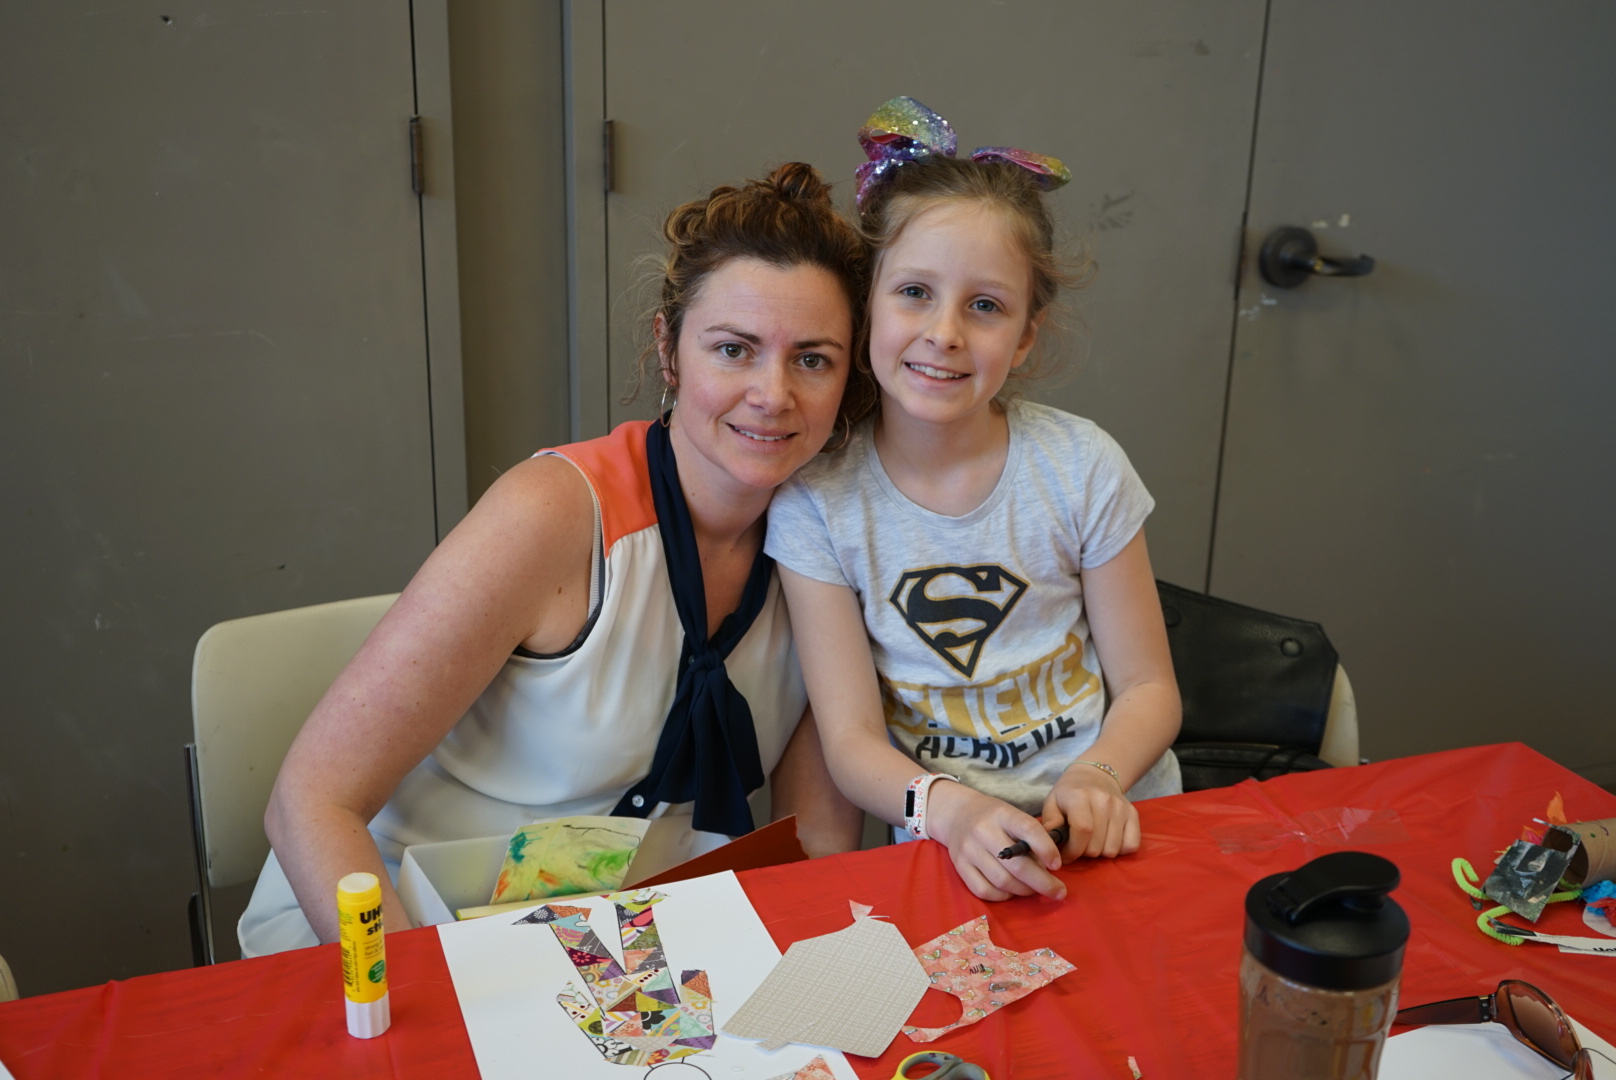 A mother and her daughter sit at table and smile at the camera with their artwork in front of them on the table